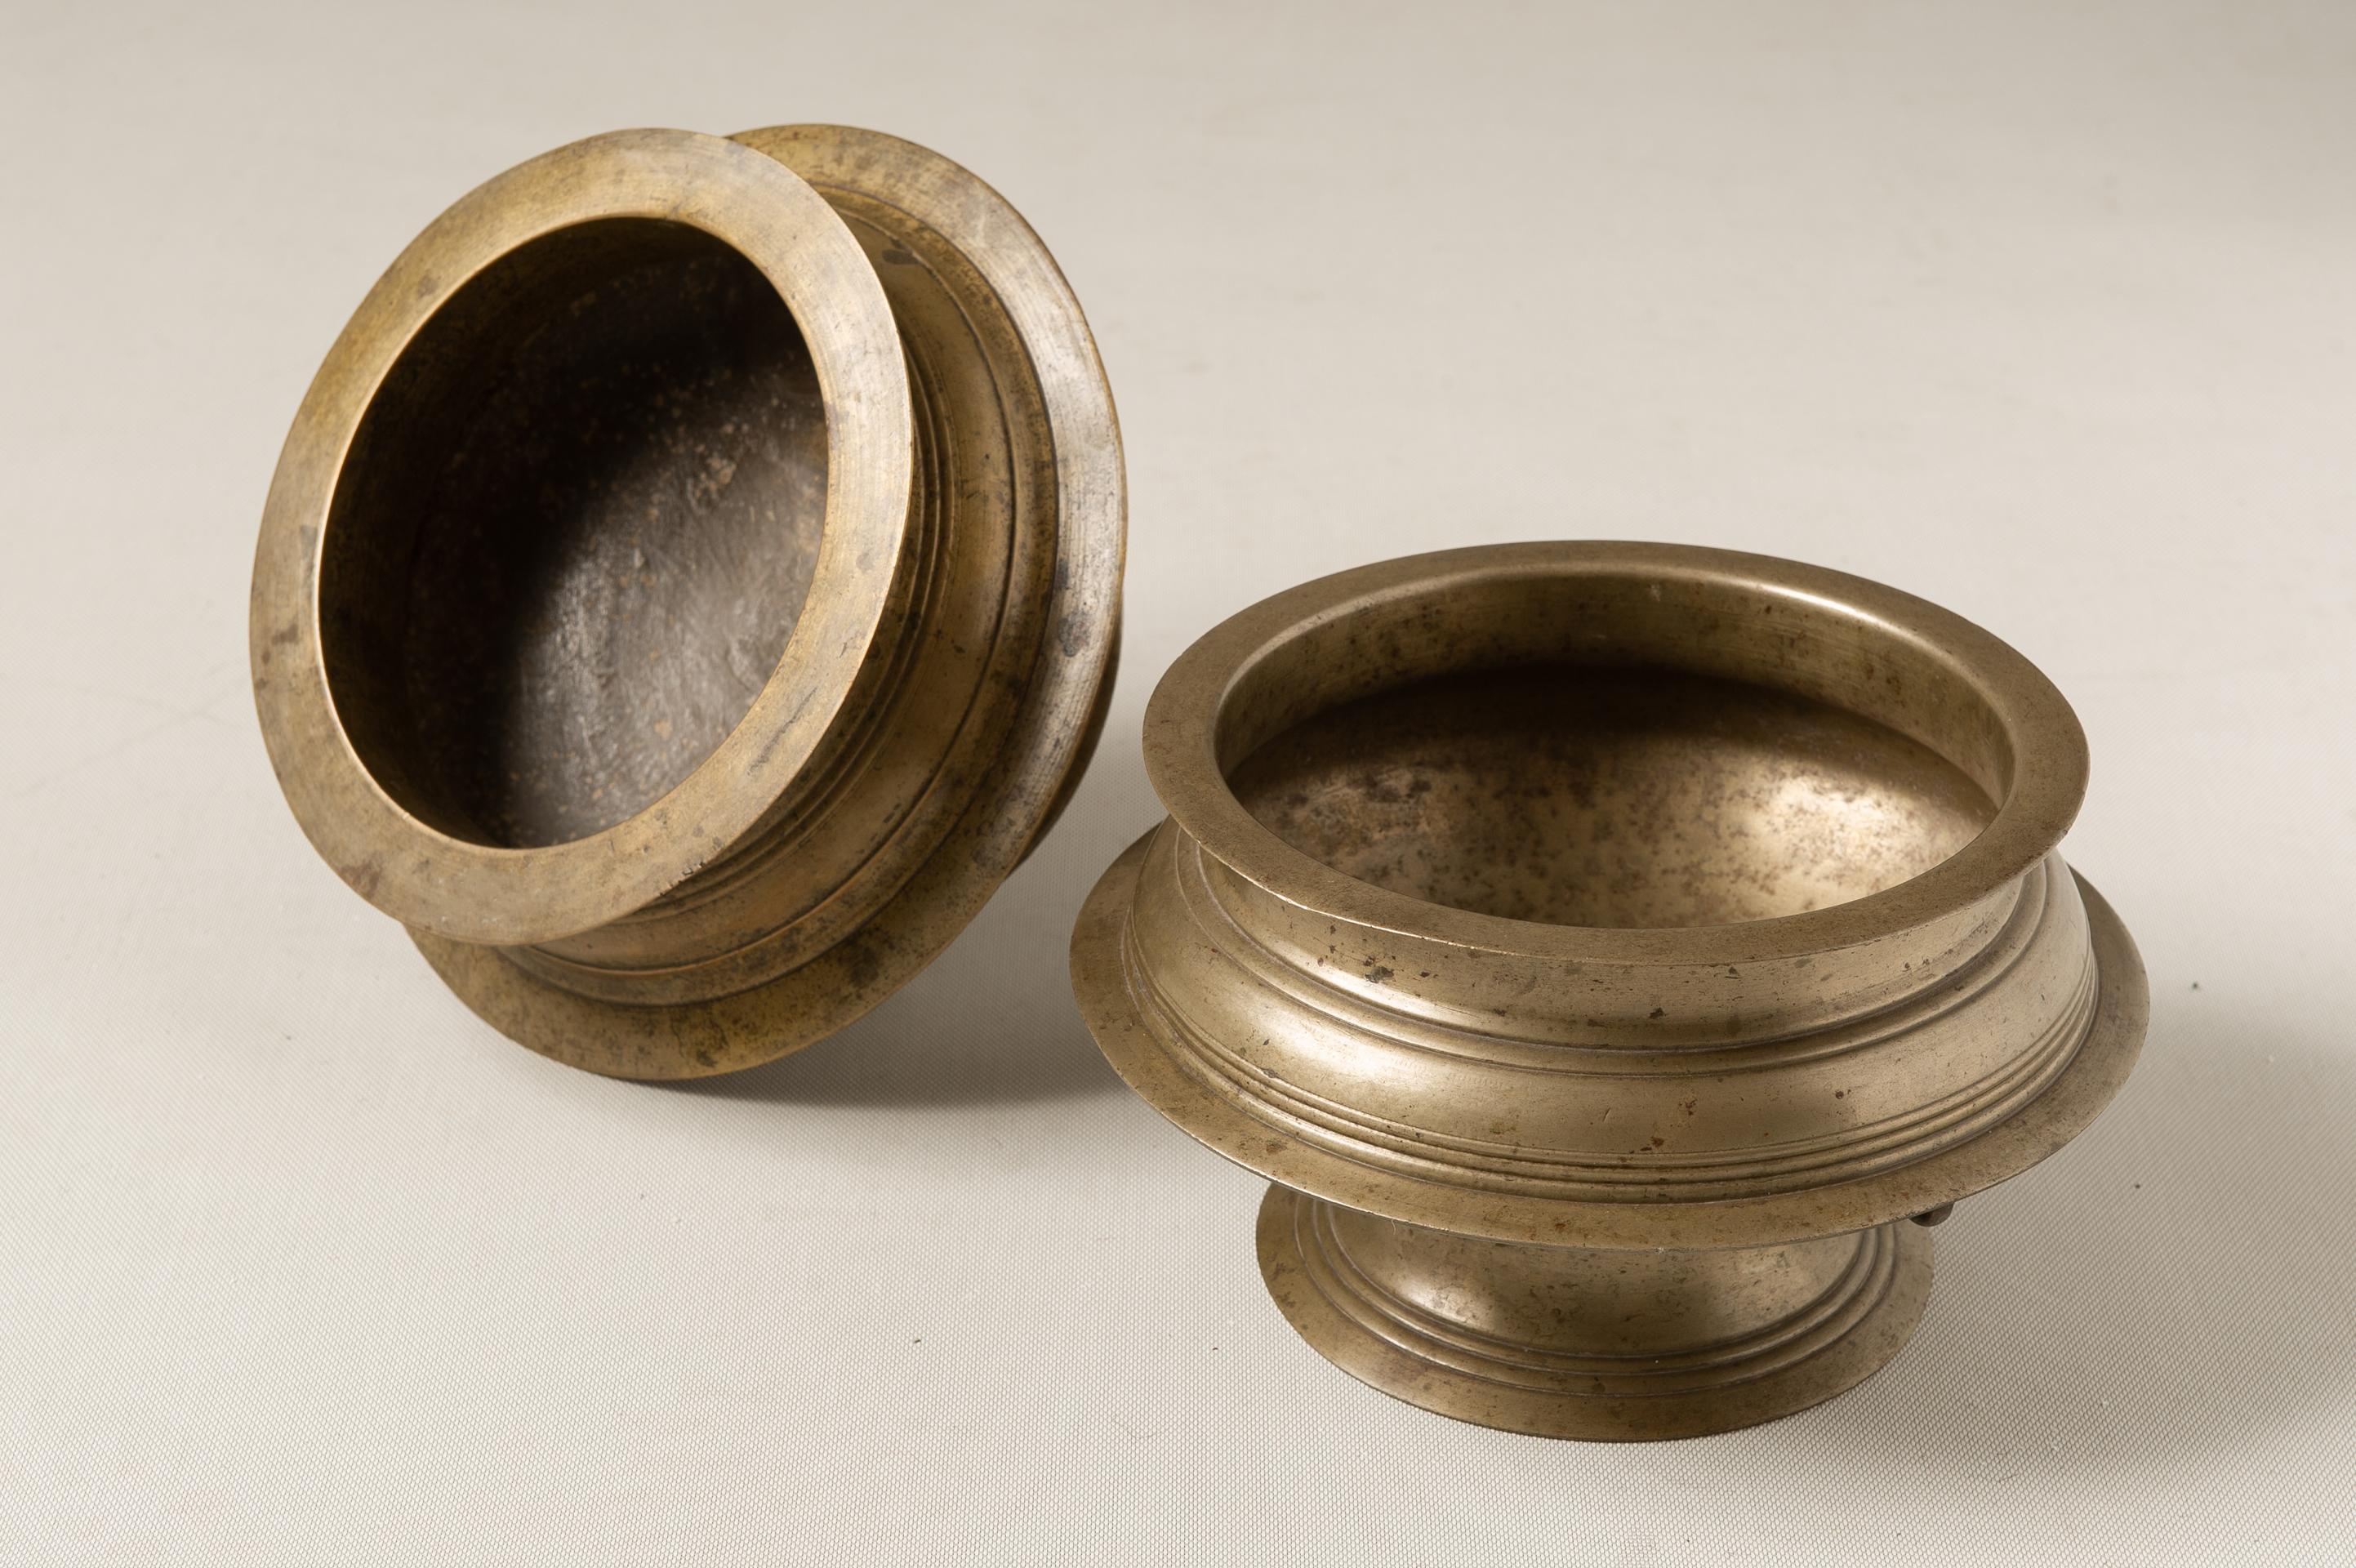 Rare pair of bronze elegant pedestal bowls from Kerala (India). They were used as temple offering bowls and everyone is in slightly different sizes. It' very difficult to find this type of bowls.
sizes: diameter 24 x height 14 - other: diameter 24 x